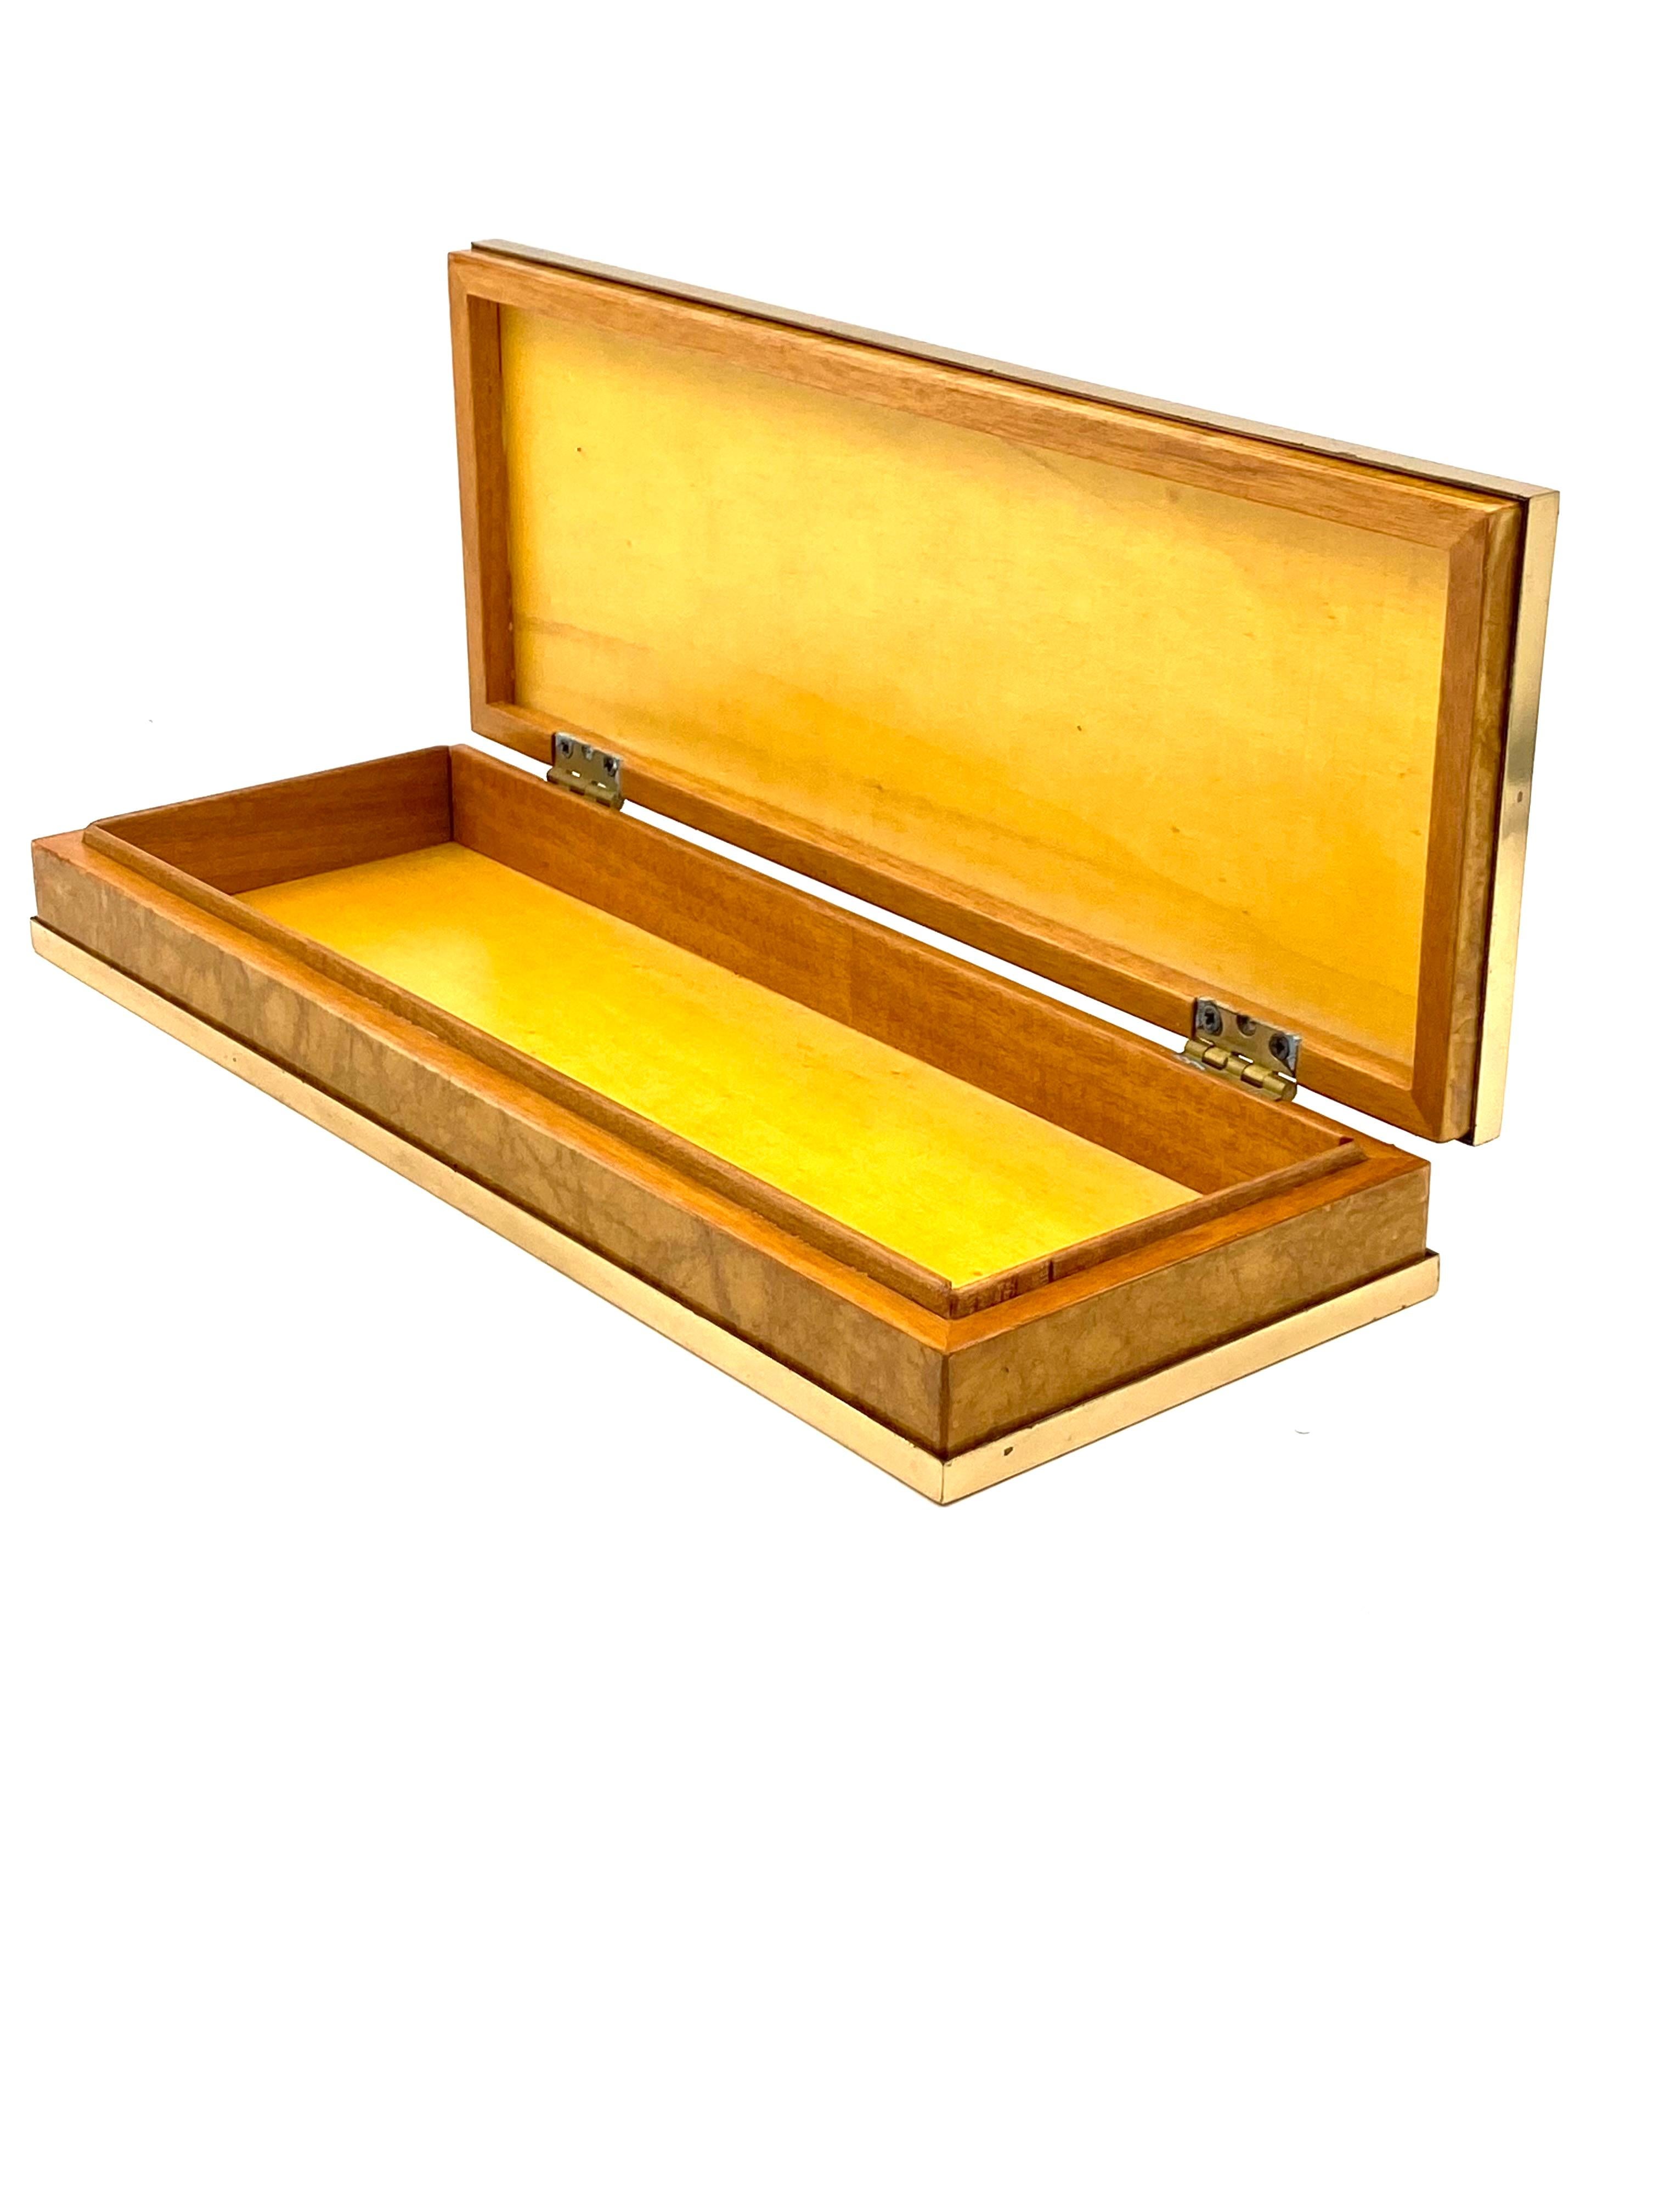 Tommaso Barbi, Wood and Brass Cigars Box, Italy, 1970 For Sale 12